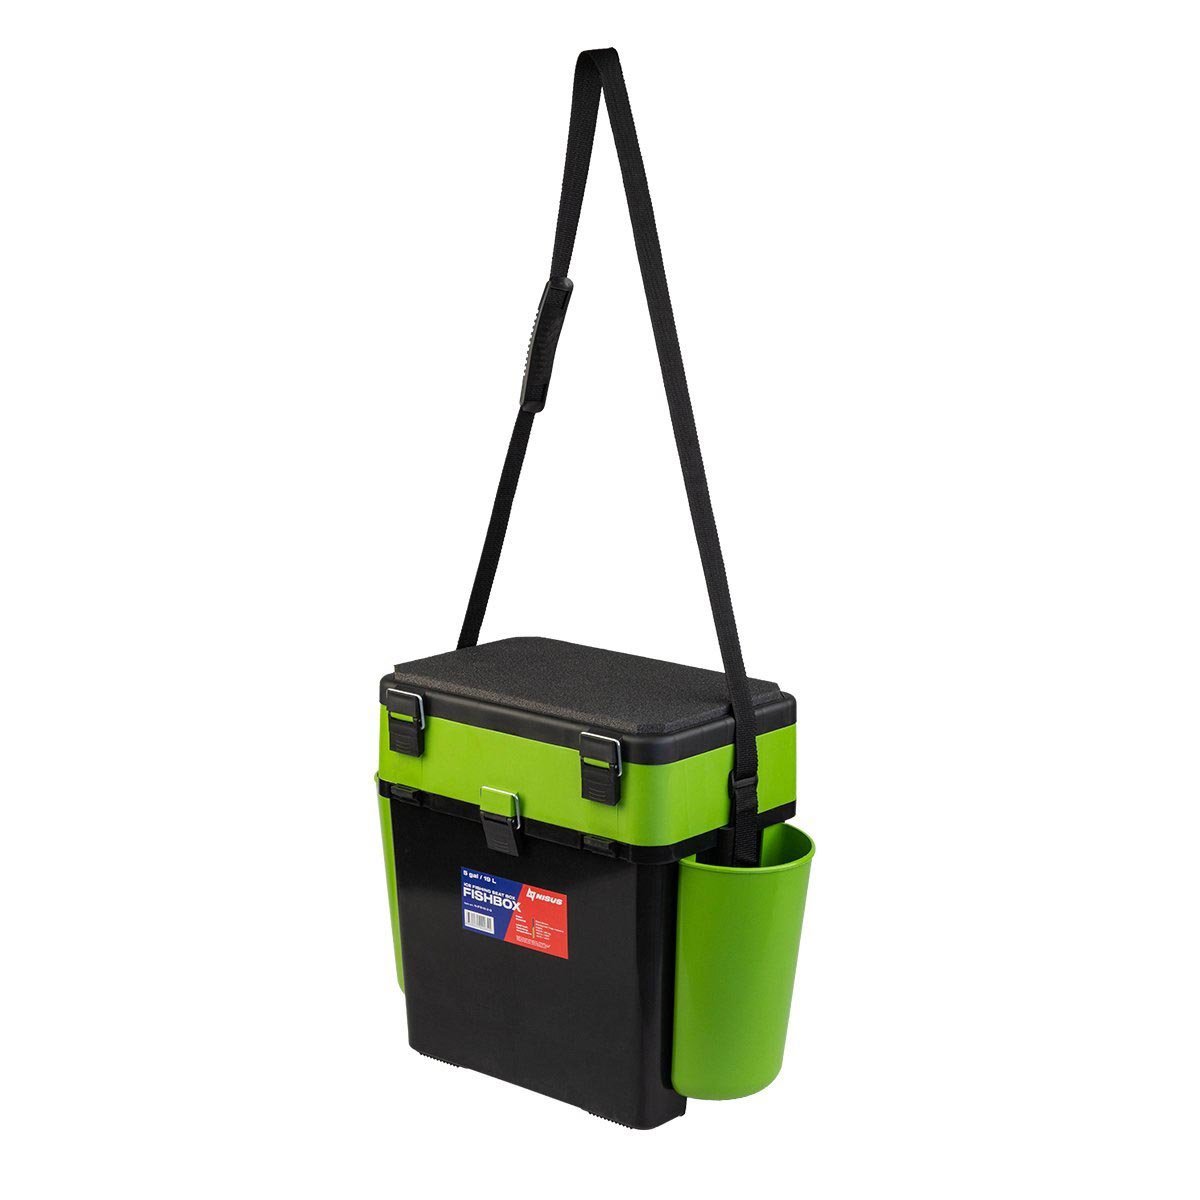 FishBox Large 5 gal Box for Ice Fishing, 2 Compartments, Green